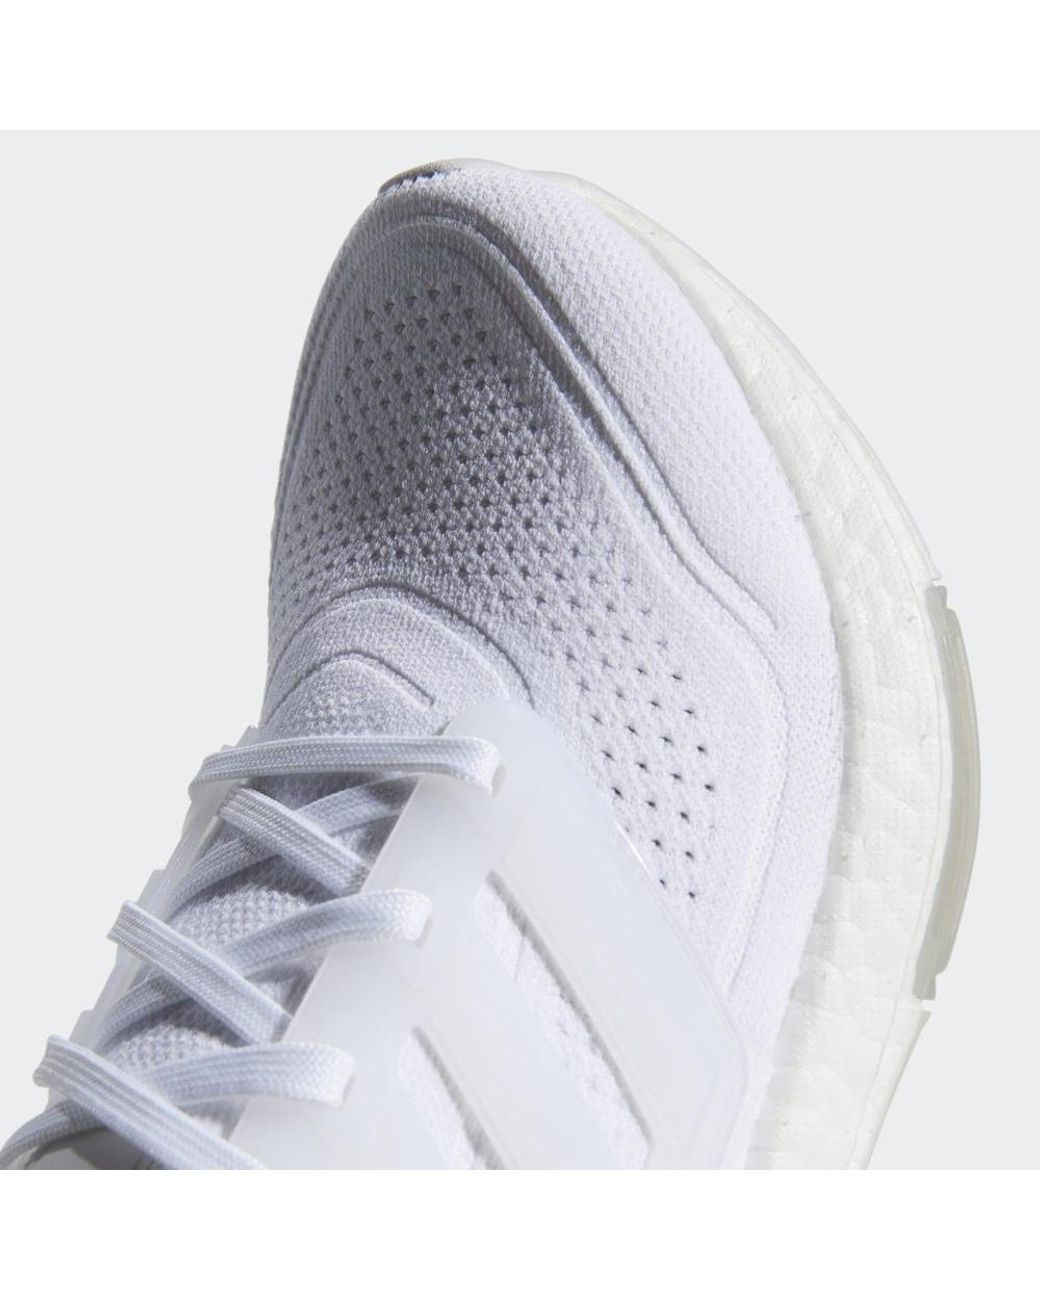 adidas Ultraboost 21 Running Shoes in White | Lyst